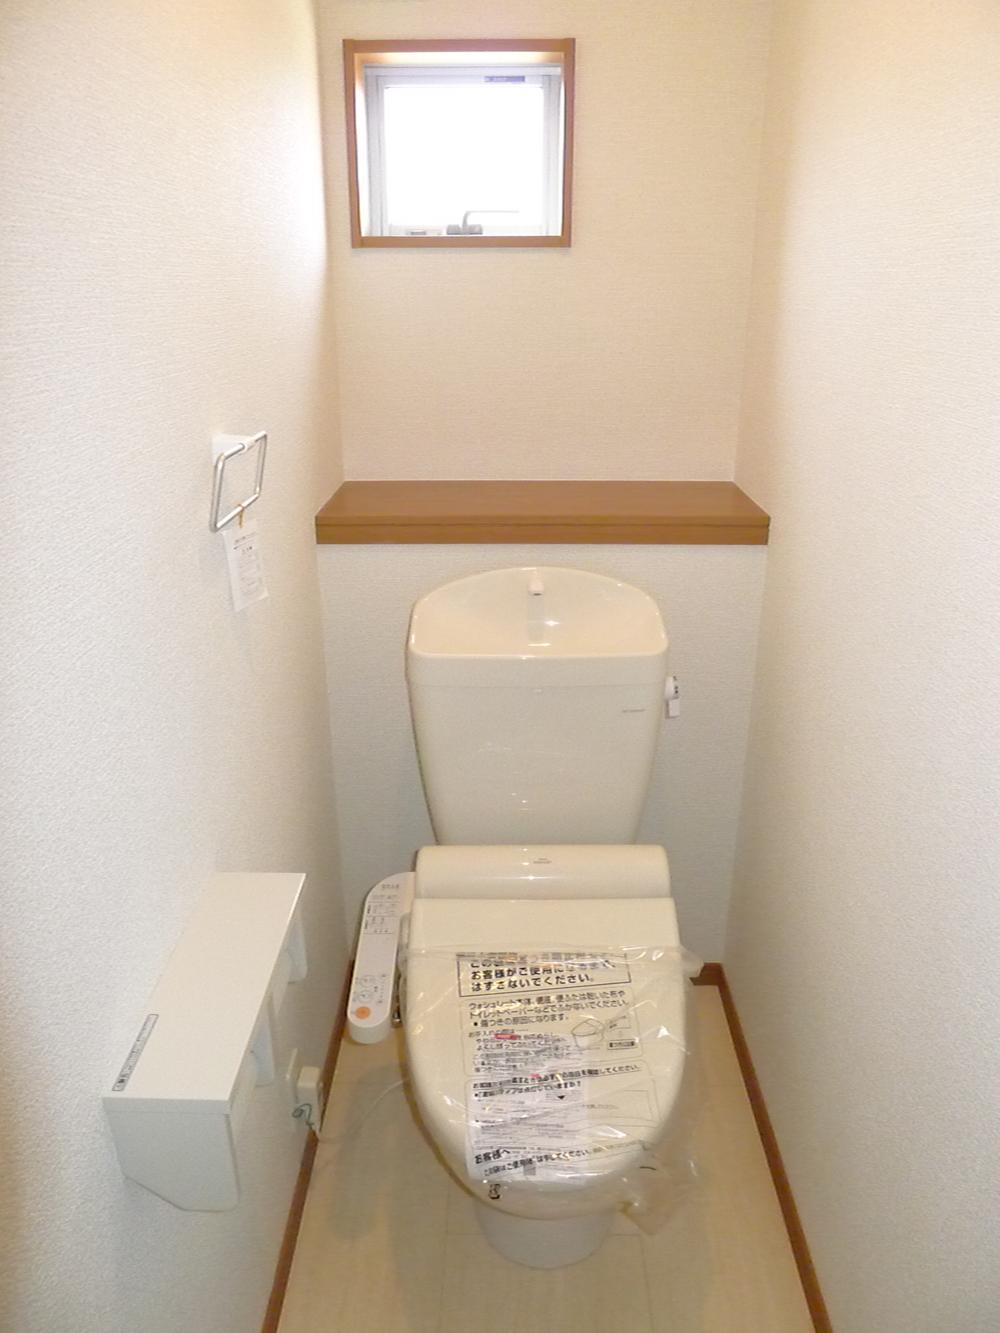 Same specifications photos (Other introspection). toilet Example of construction